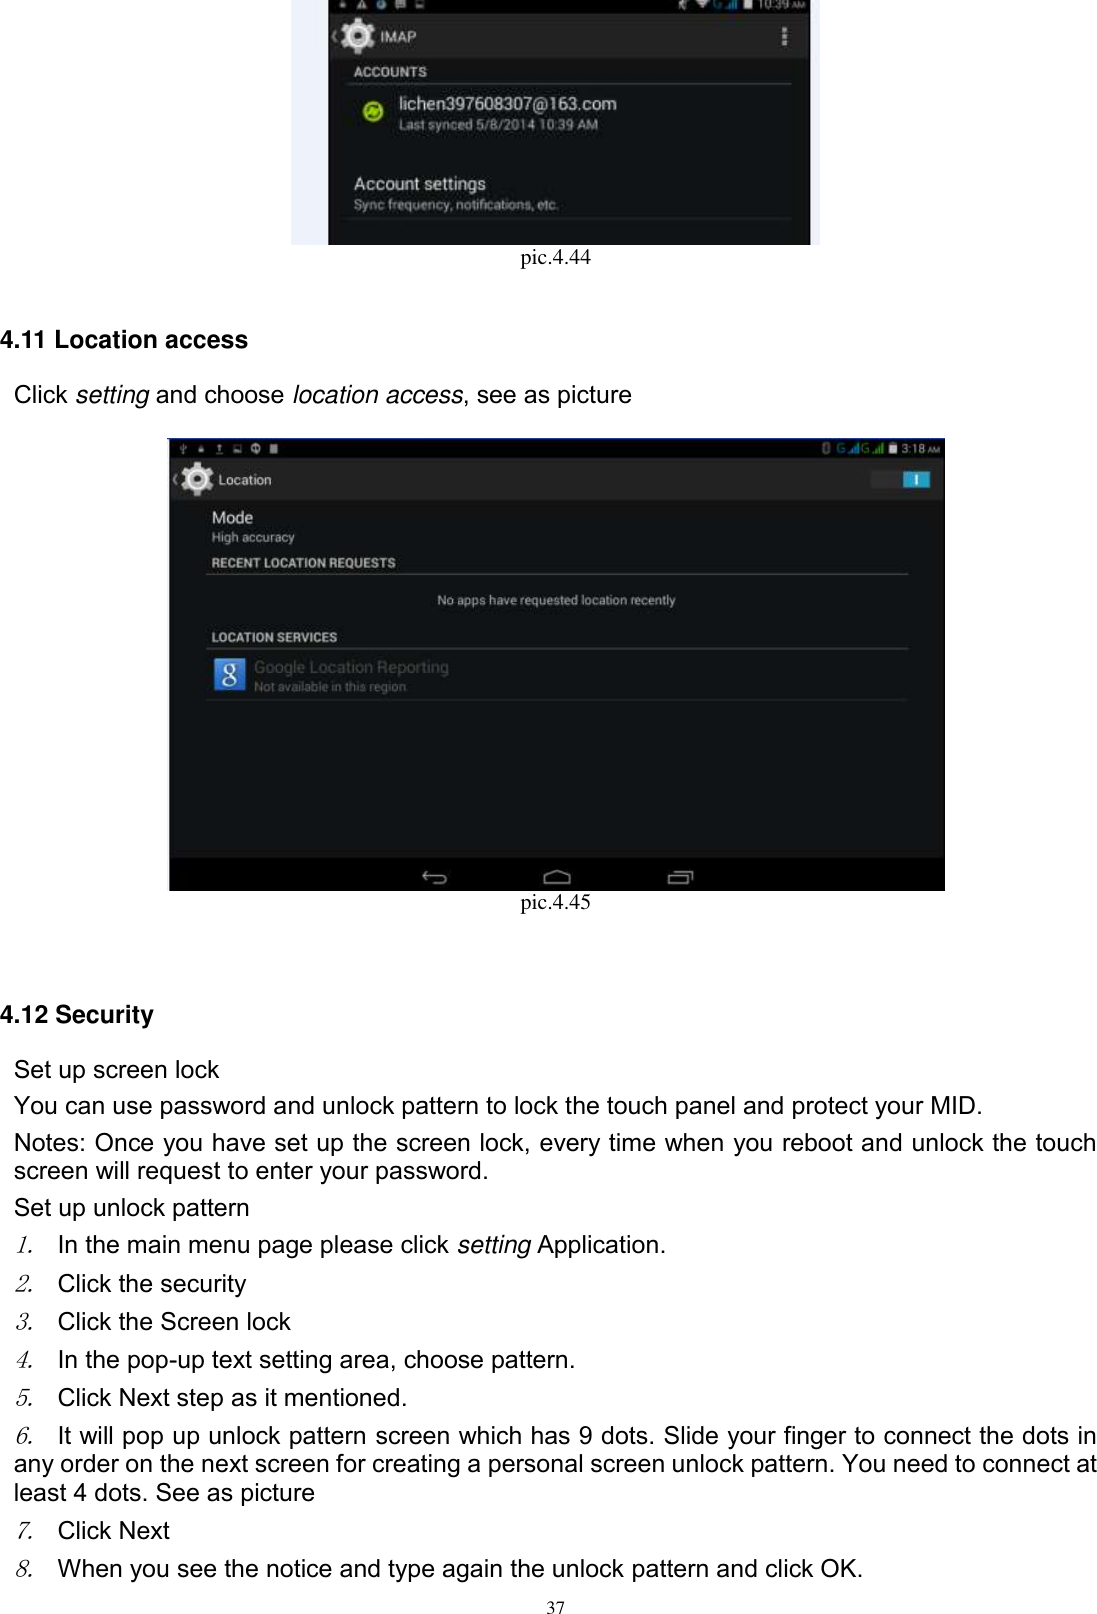      37  pic.4.44  4.11 Location access Click setting and choose location access, see as picture       pic.4.45   4.12 Security Set up screen lock You can use password and unlock pattern to lock the touch panel and protect your MID. Notes: Once you have set up the screen lock, every time when you reboot and unlock the touch screen will request to enter your password. Set up unlock pattern 1. In the main menu page please click setting Application. 2. Click the security   3. Click the Screen lock 4. In the pop-up text setting area, choose pattern. 5. Click Next step as it mentioned.   6. It will pop up unlock pattern screen which has 9 dots. Slide your finger to connect the dots in any order on the next screen for creating a personal screen unlock pattern. You need to connect at least 4 dots. See as picture   7. Click Next 8. When you see the notice and type again the unlock pattern and click OK. 